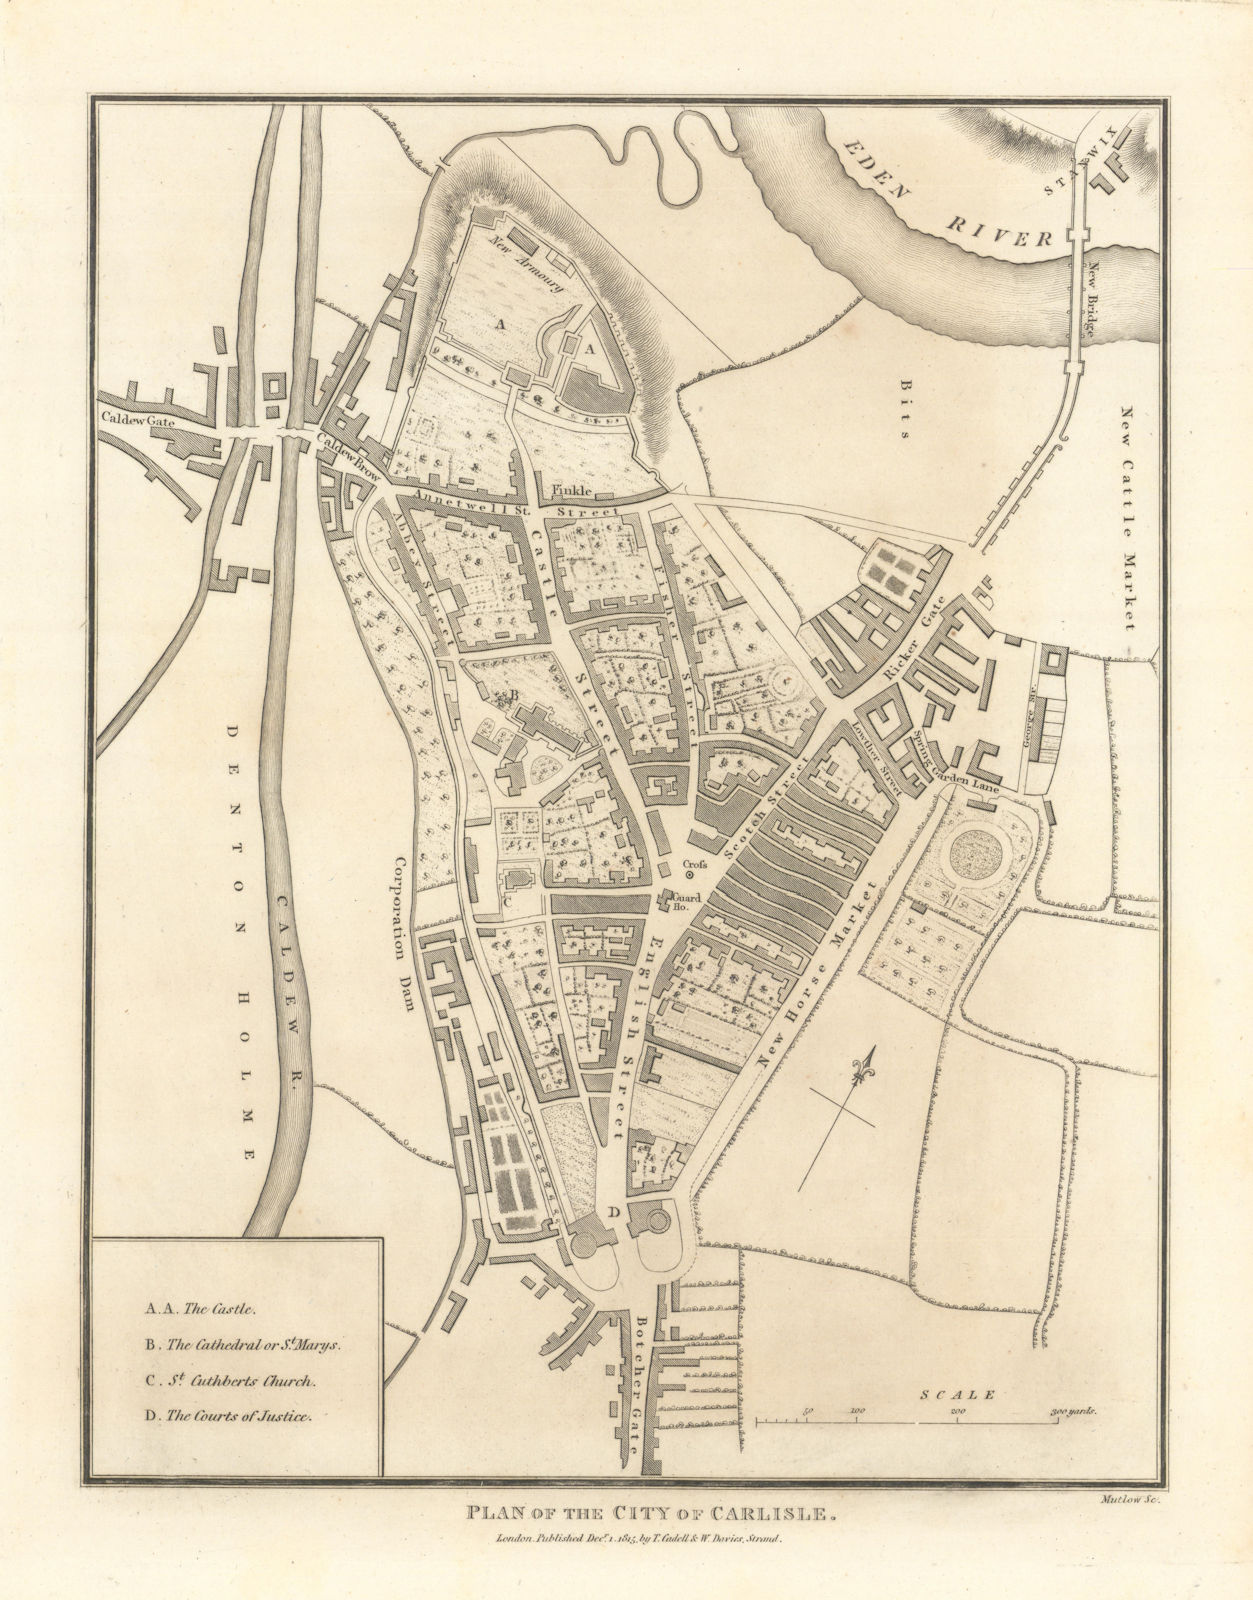 Associate Product 'Plan of the City of Carlisle' by Henry Mutlow 1816 old antique map chart